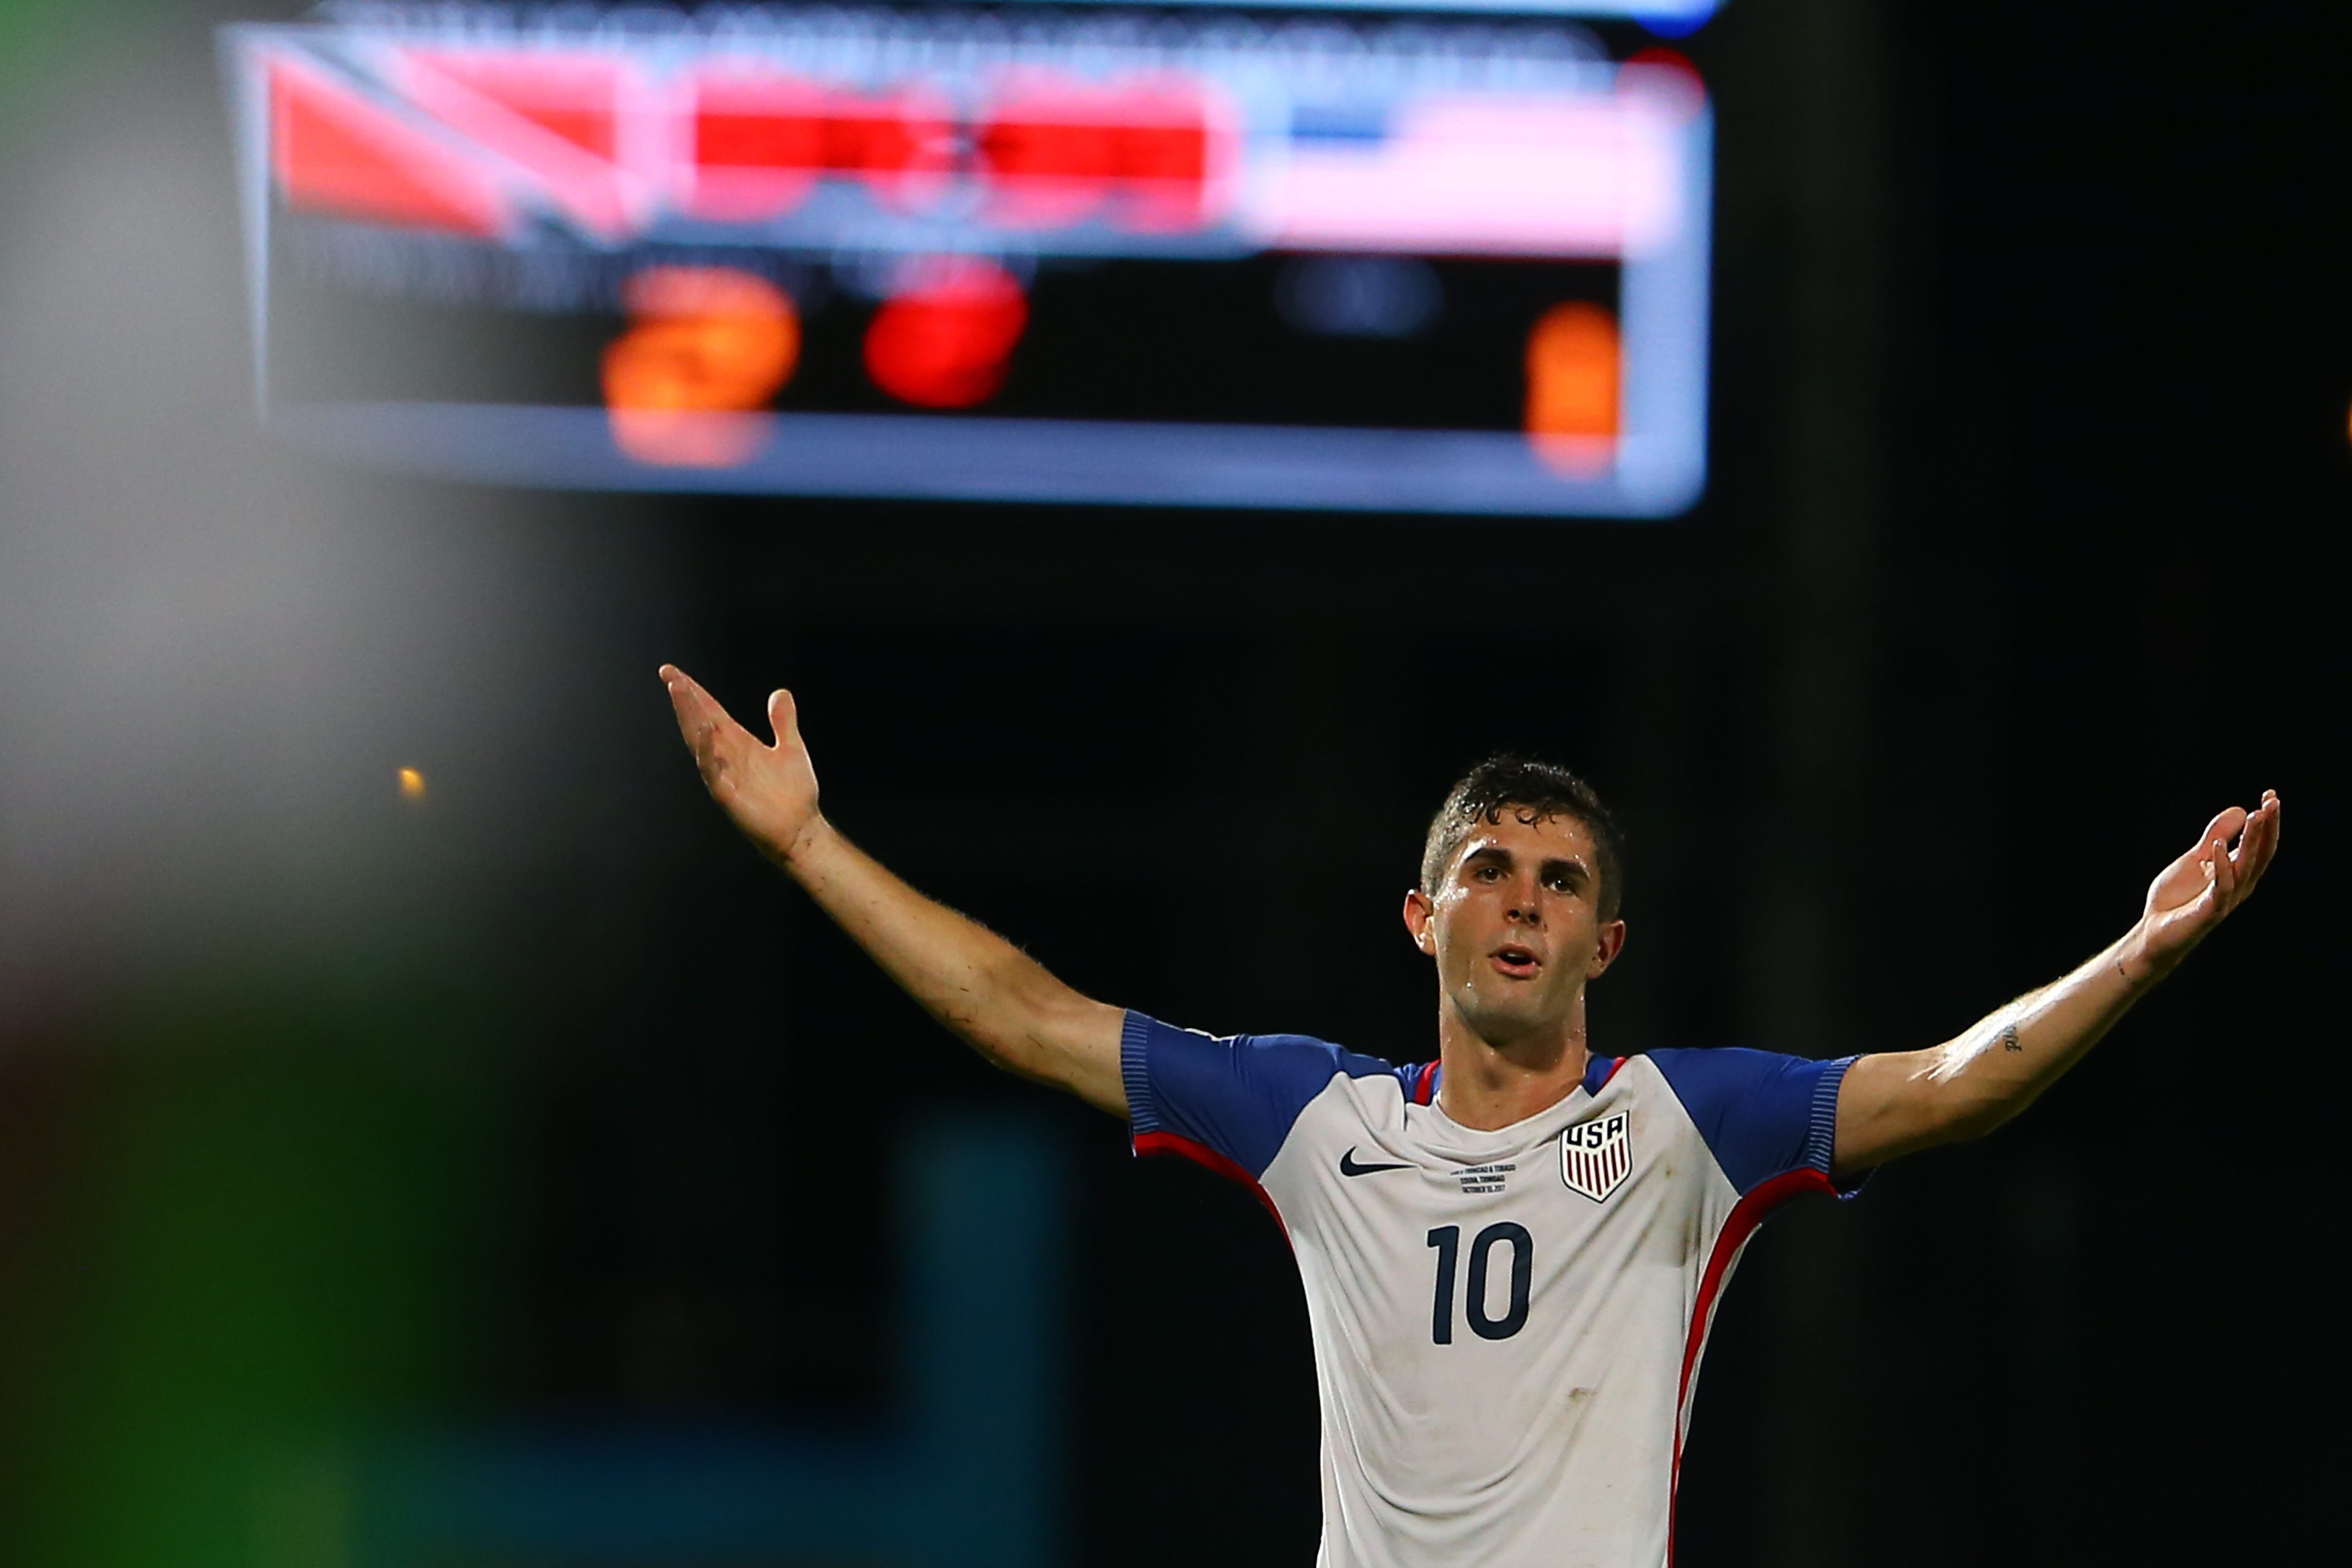 U.S. men's soccer team may open 2022 World Cup qualifying in Trinidad